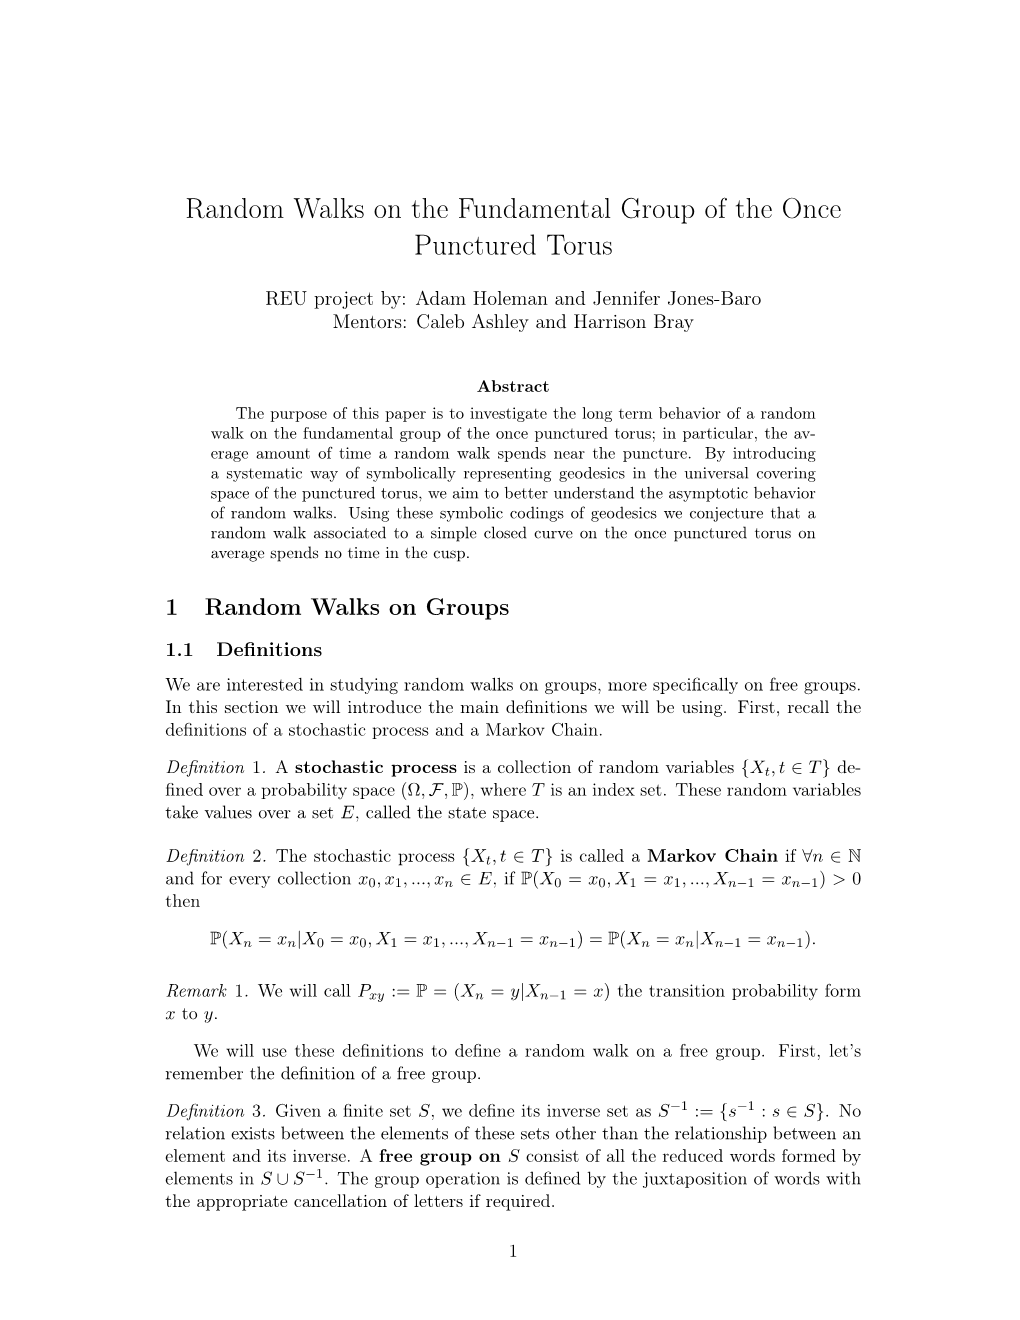 Random Walks on the Fundamental Group of the Once Punctured Torus